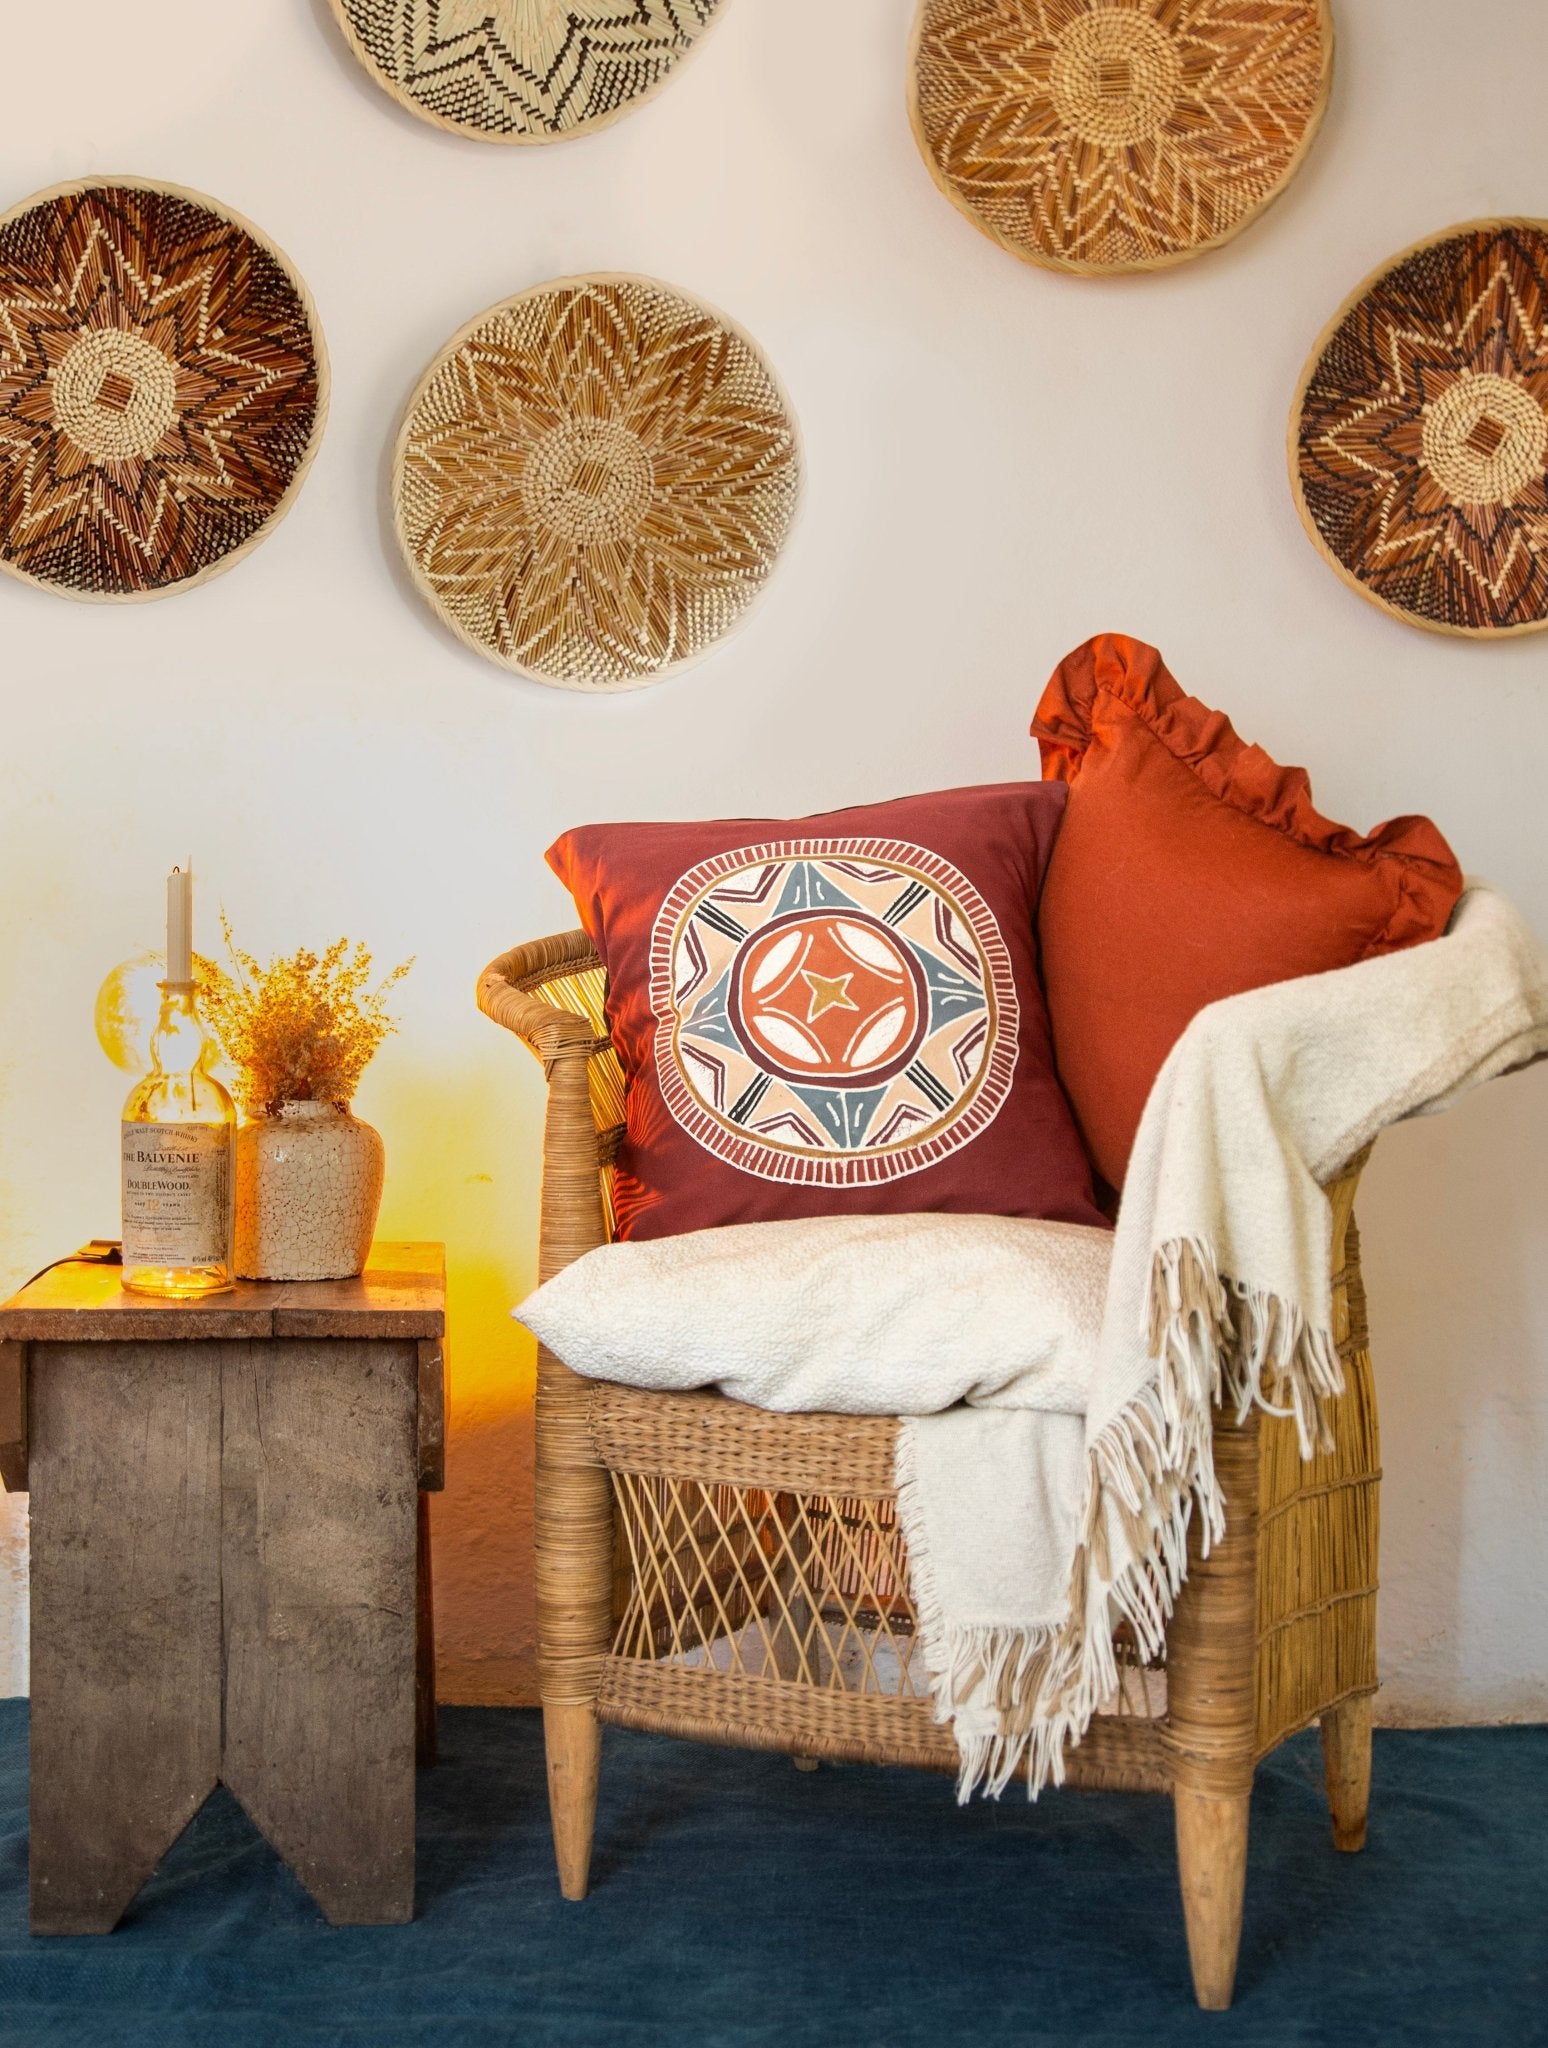 African Circles Massai Red Cushion Cover - Handmade by TRIBAL TEXTILES - Handcrafted Home Decor Interiors - African Made